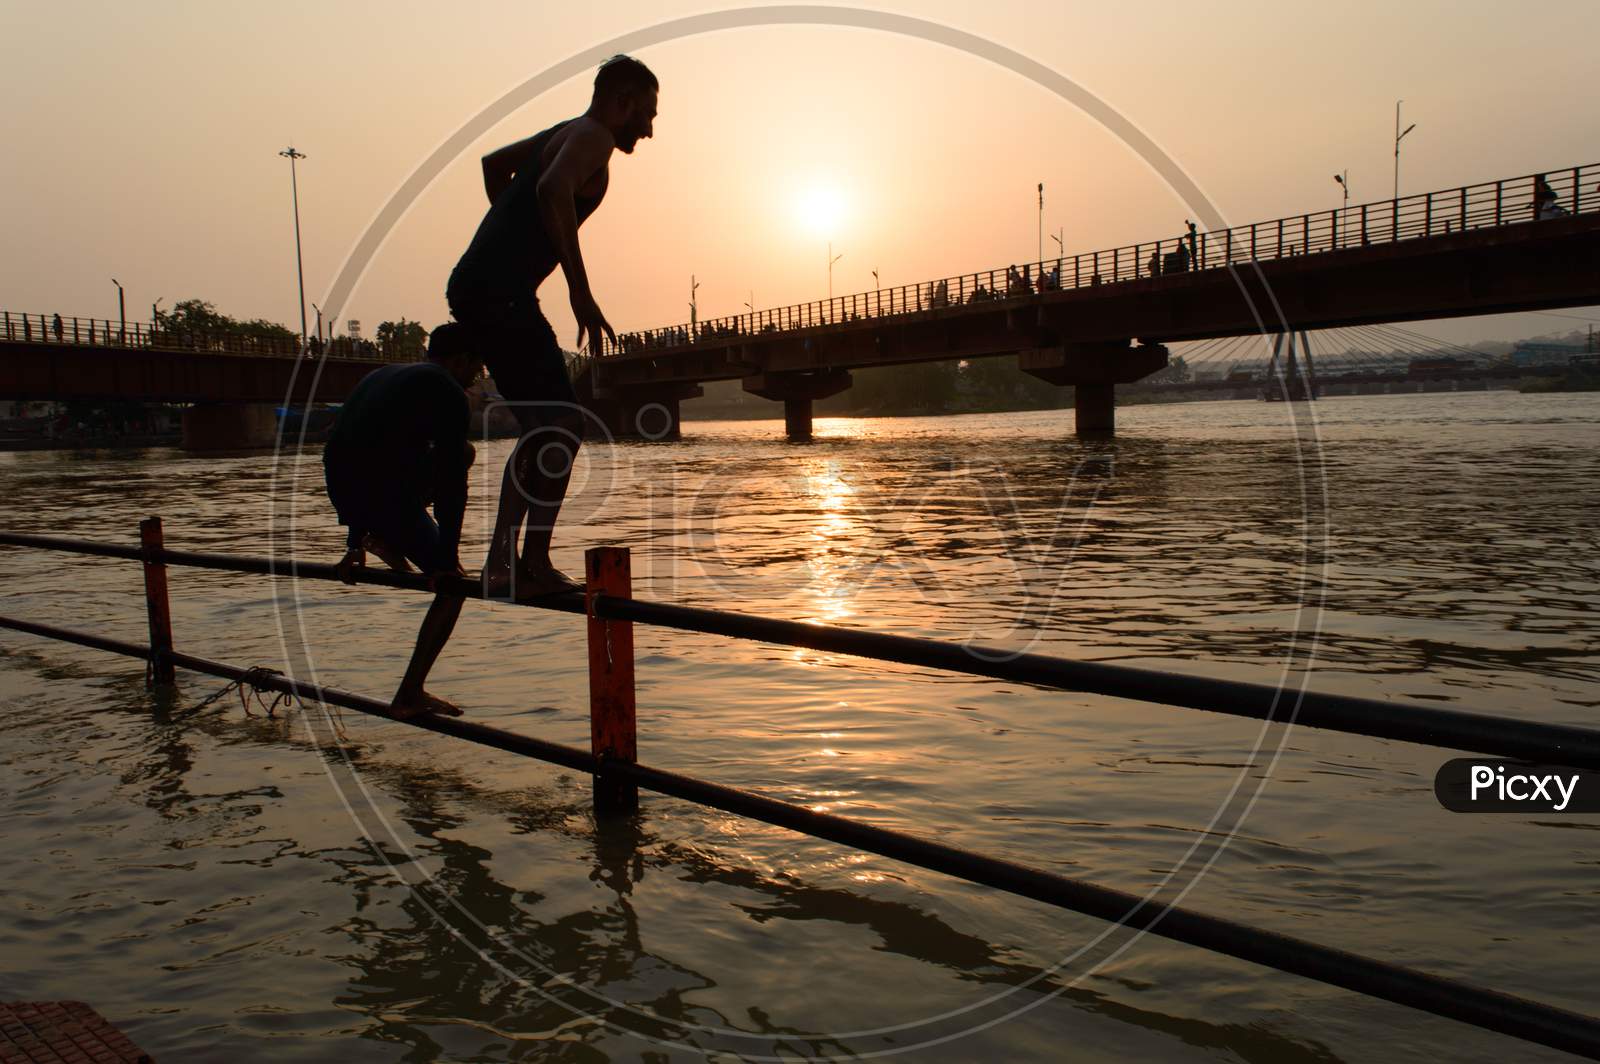 Two Boys Going To Jump Into Ganga River For Relief Of Heat In Summer At Sunrise At Haridwar Bridge Temple Sky.